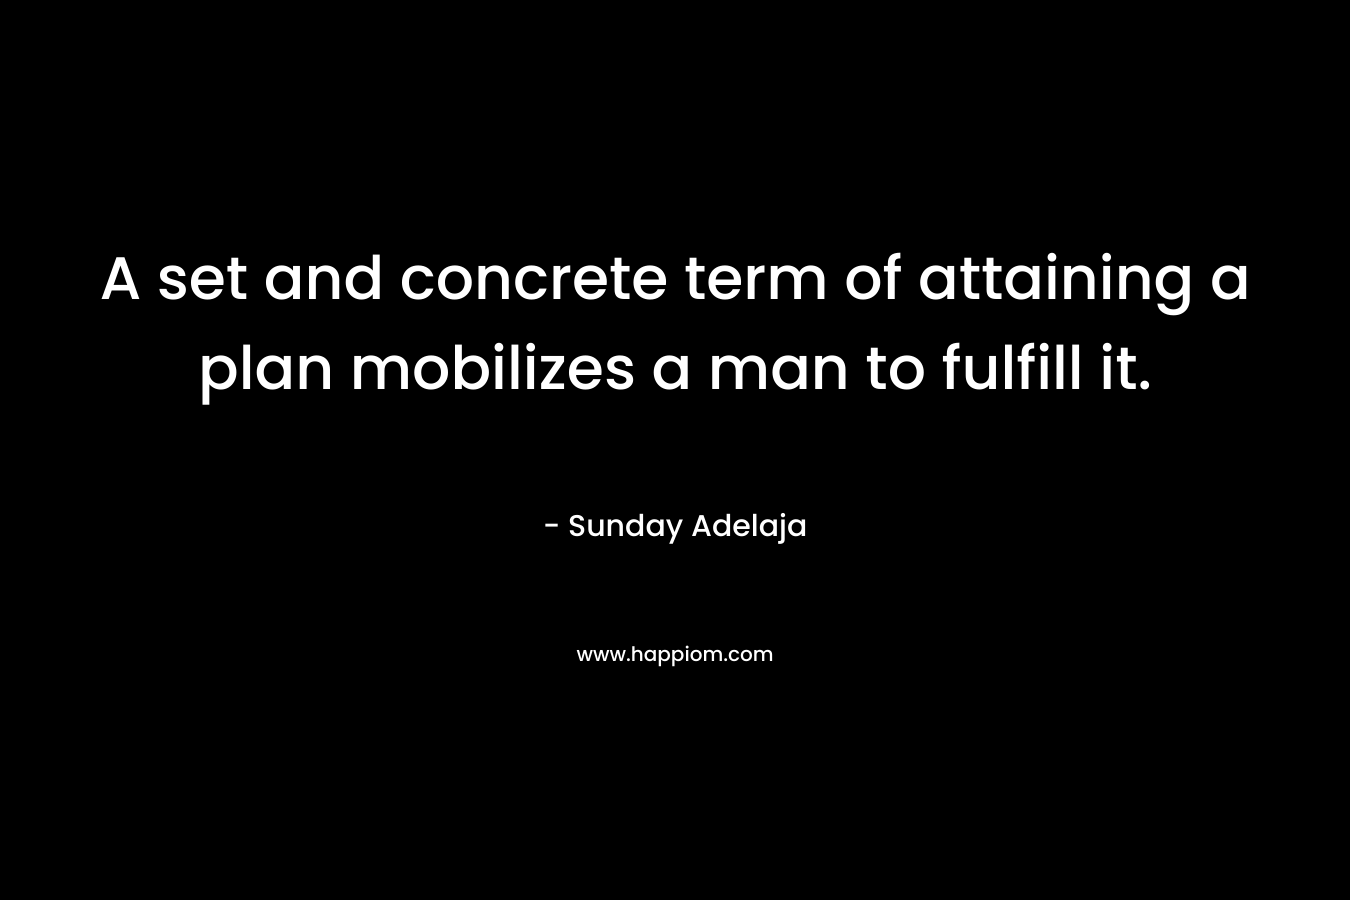 A set and concrete term of attaining a plan mobilizes a man to fulfill it.